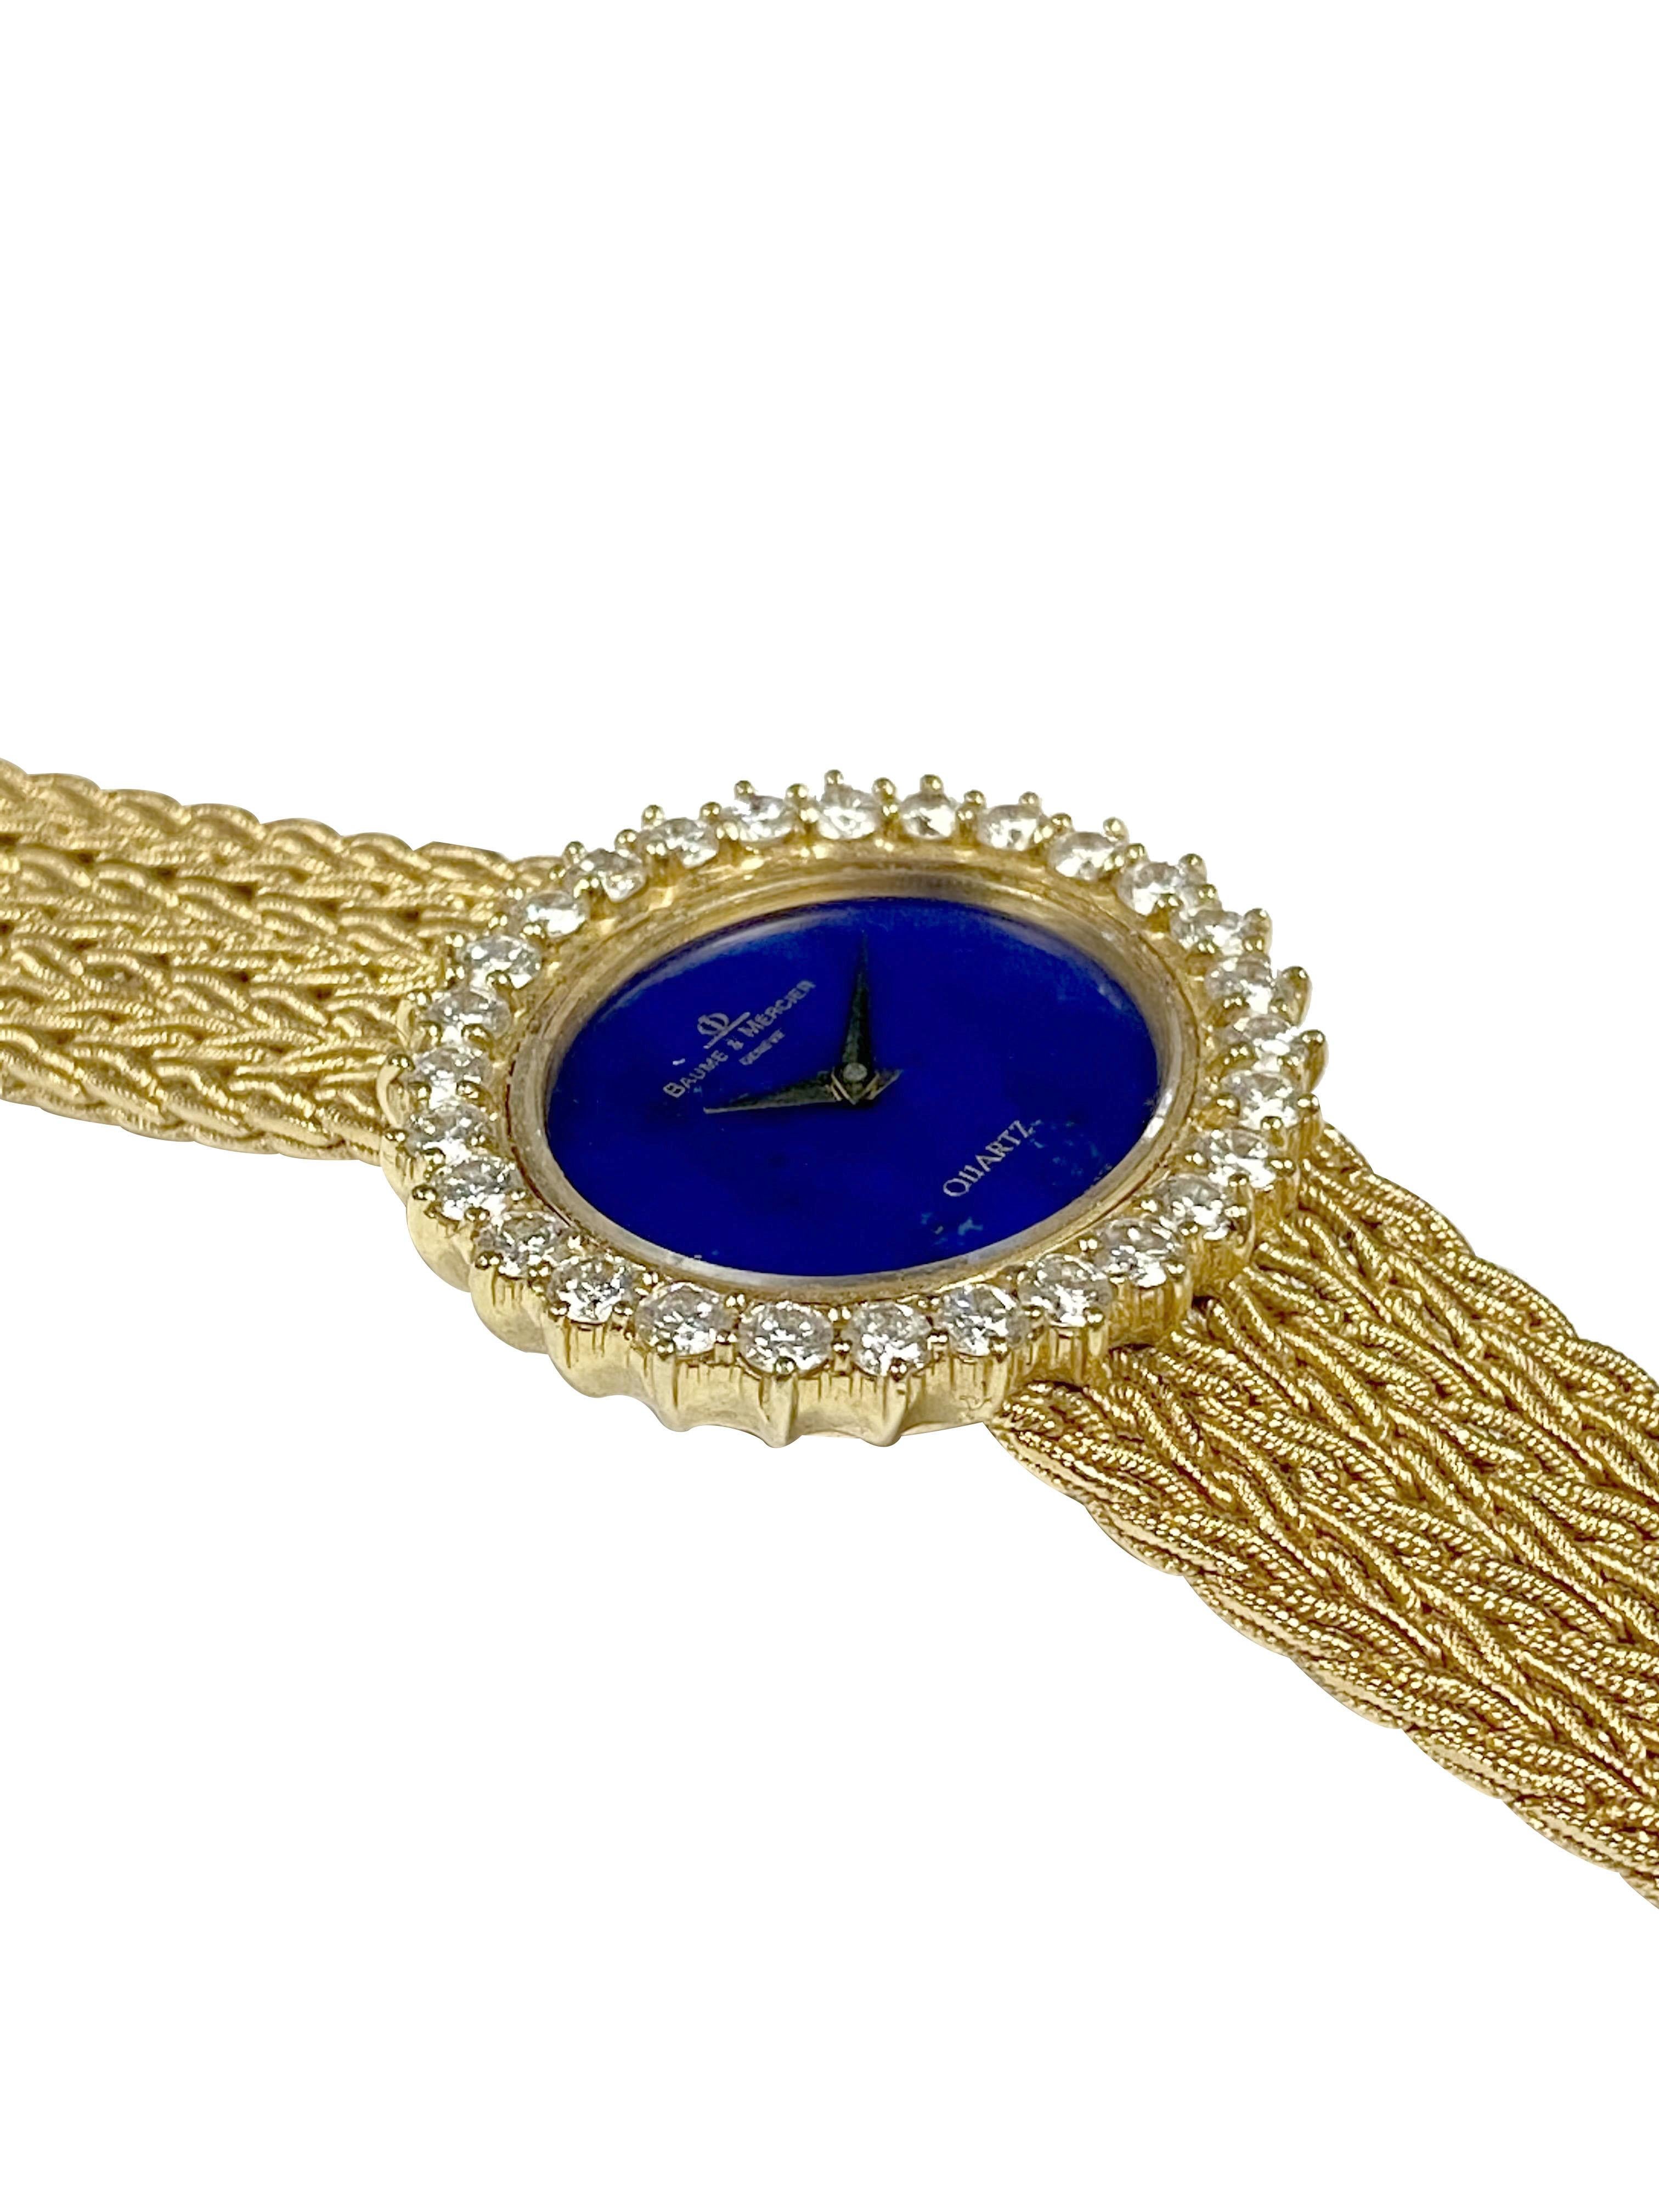 Circa 1980 Baum & Mercier Ladies Wrist Watch, 30 X 27 M.M. 2 piece 18K Yellow Gold case with a Bezel of Round Brilliant cut Diamonds totaling 2 Carats and Grading as G in Color and VS in Clarity. Lapis Lazuli Dial and a Sapphire crown. 17 Jewel